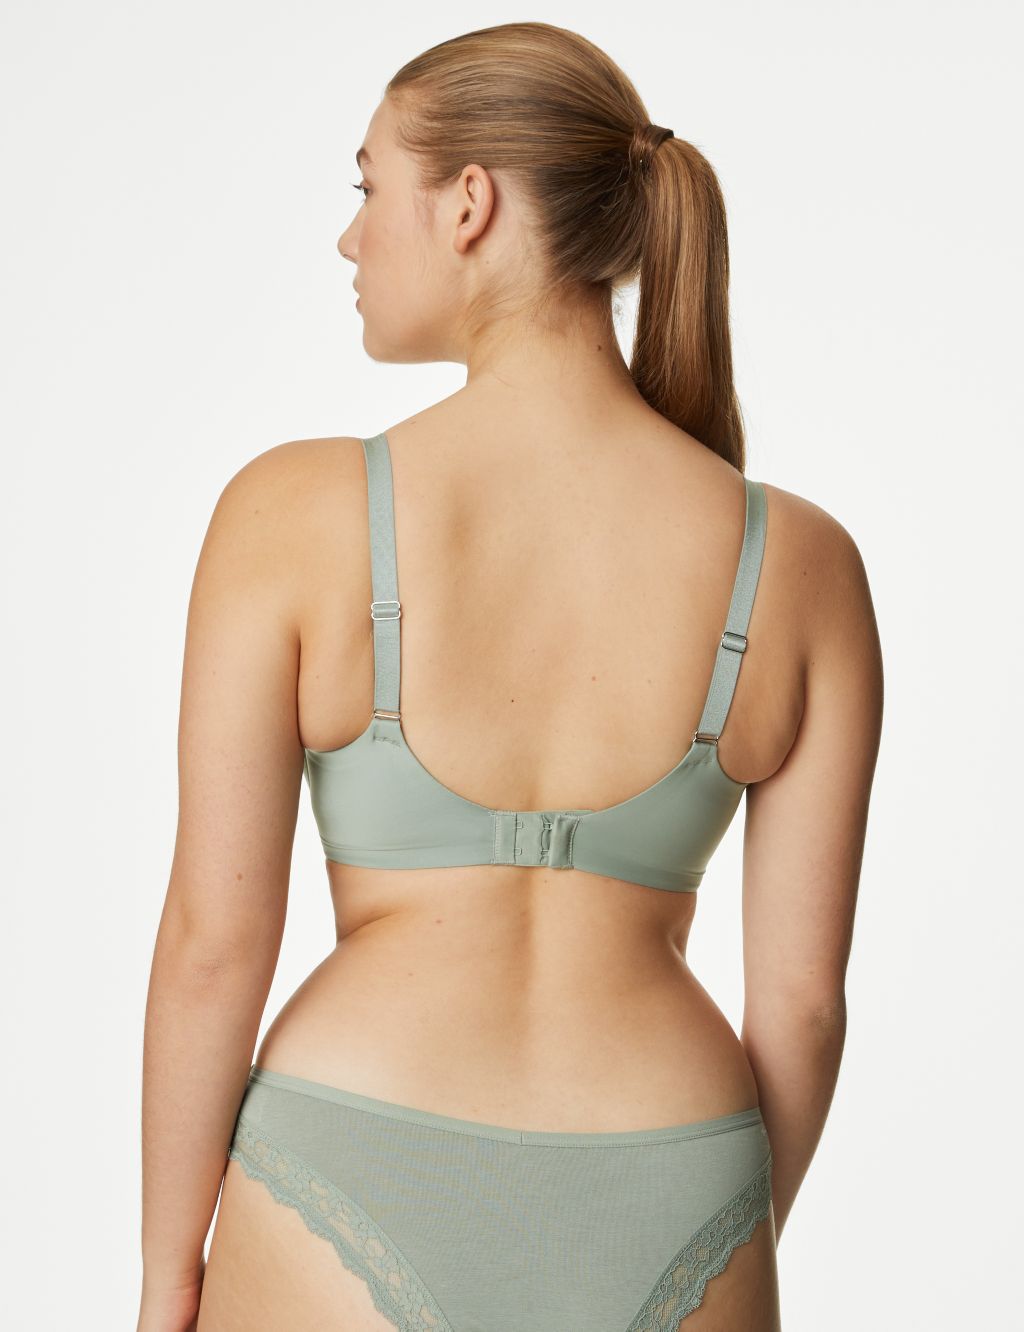 Embrace Wired Extra Support Bra F-J image 4